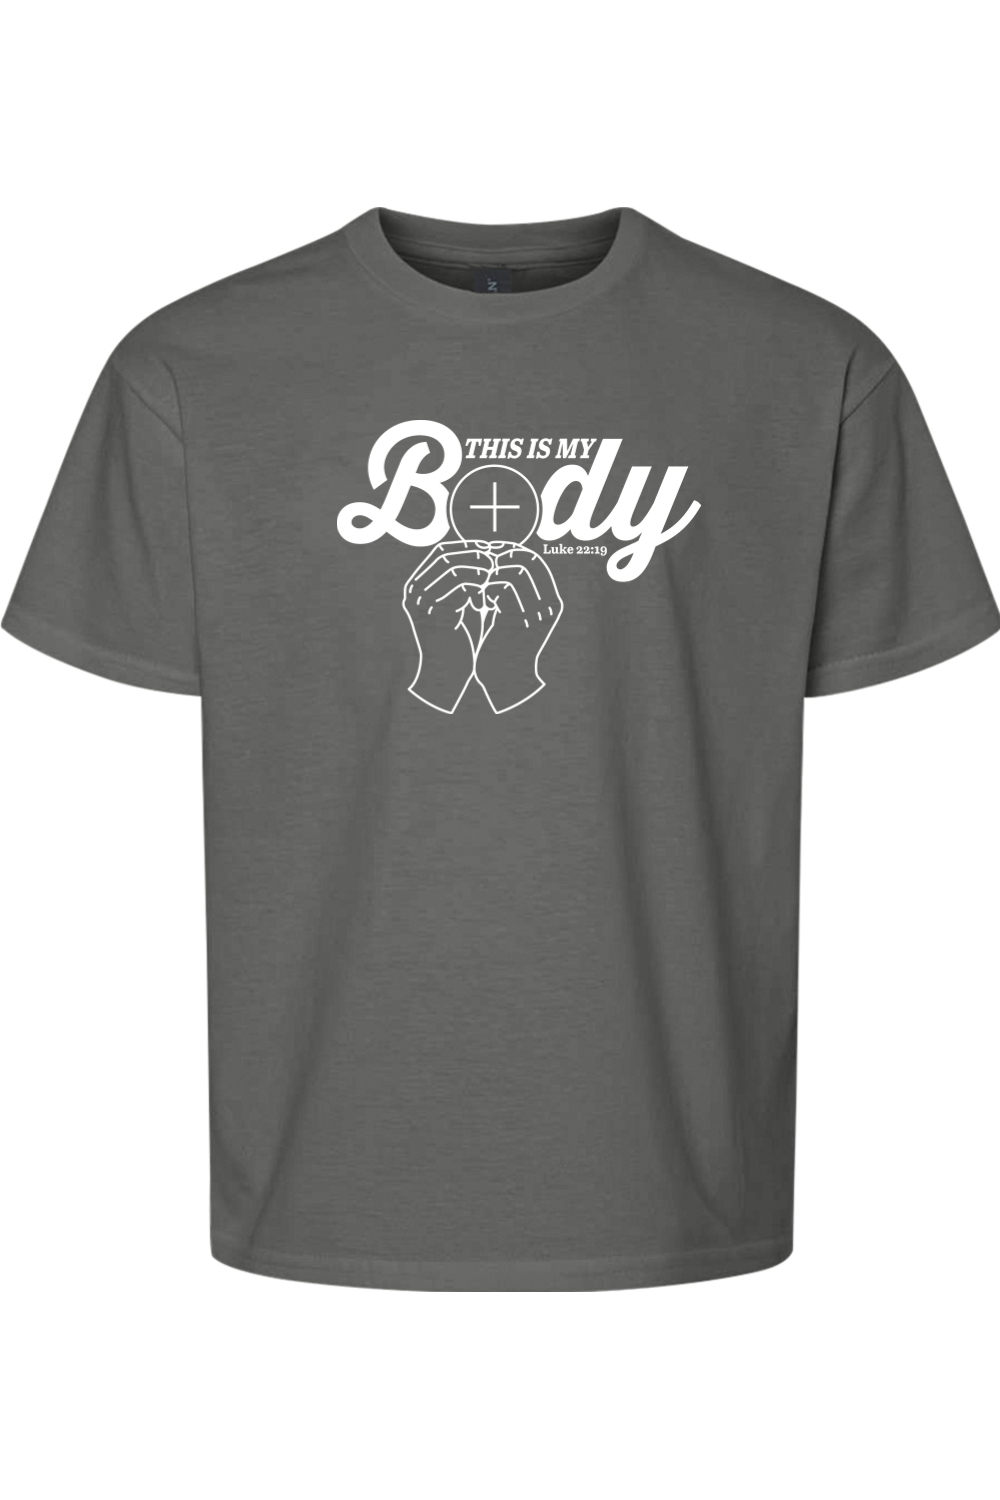 This is My Body Consecration Luke 22:19 T-shirt - youth